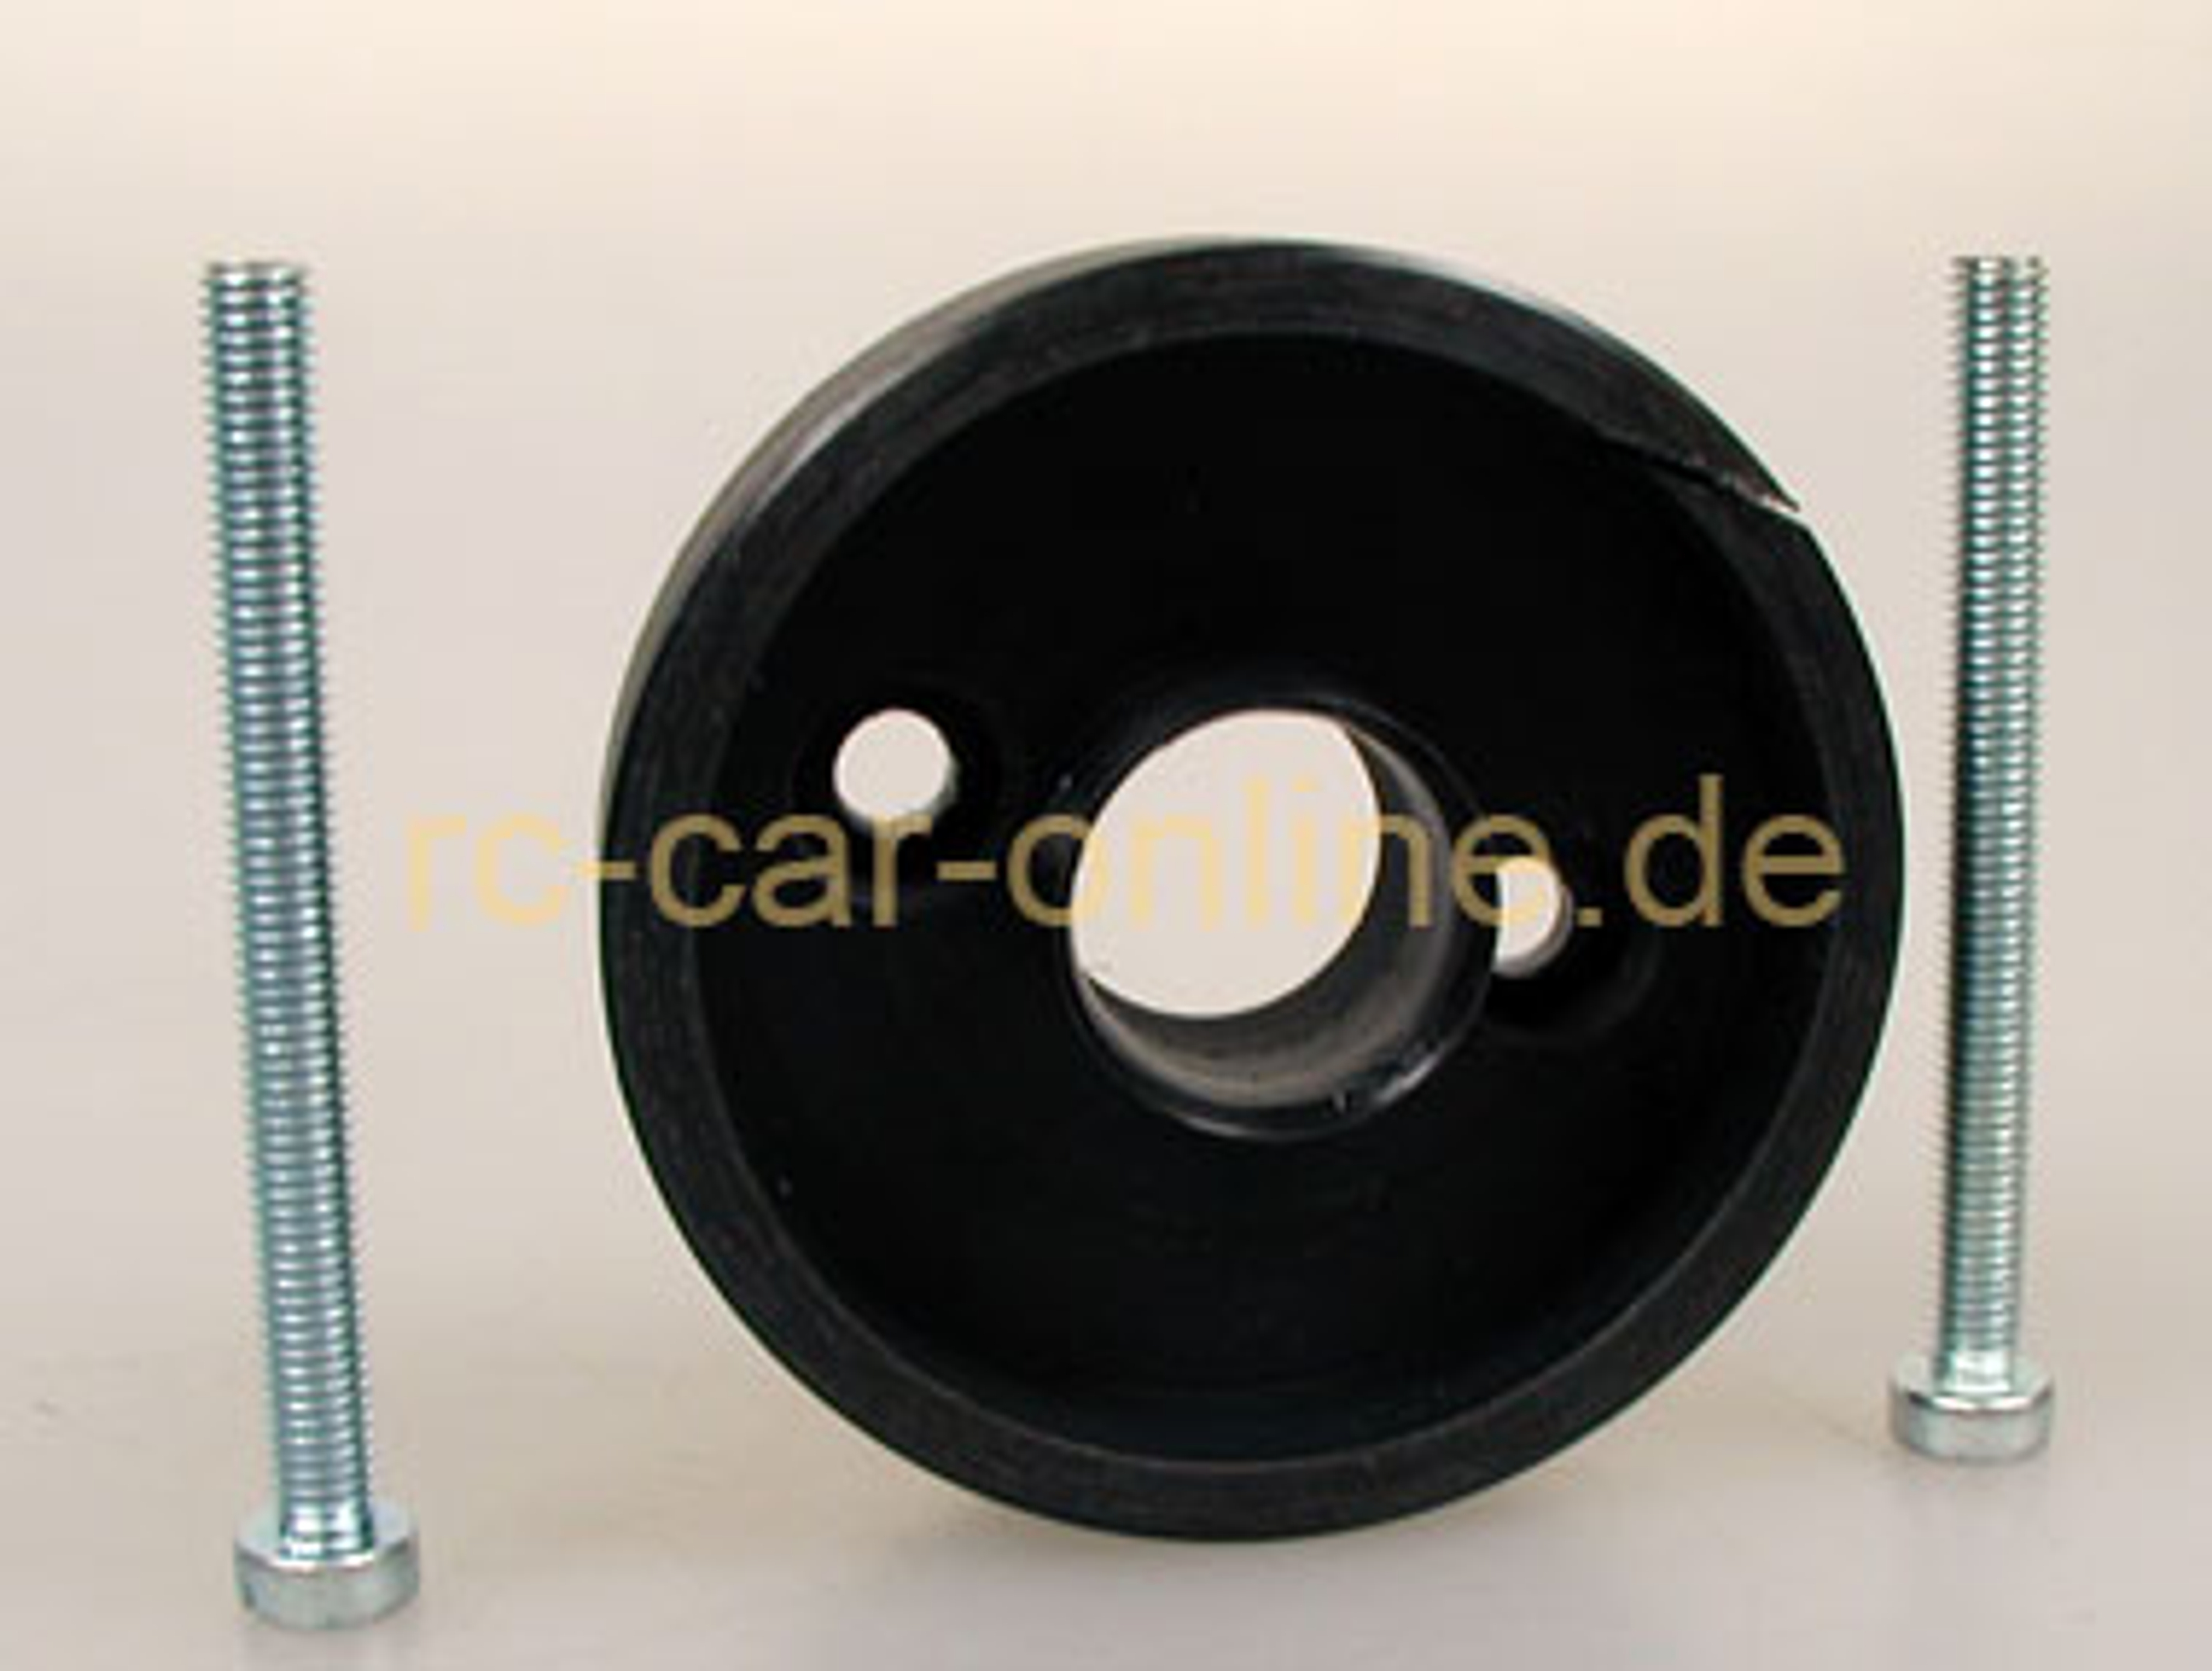 Filter Adaptor HT-Airbox, y19026 - 1pce.